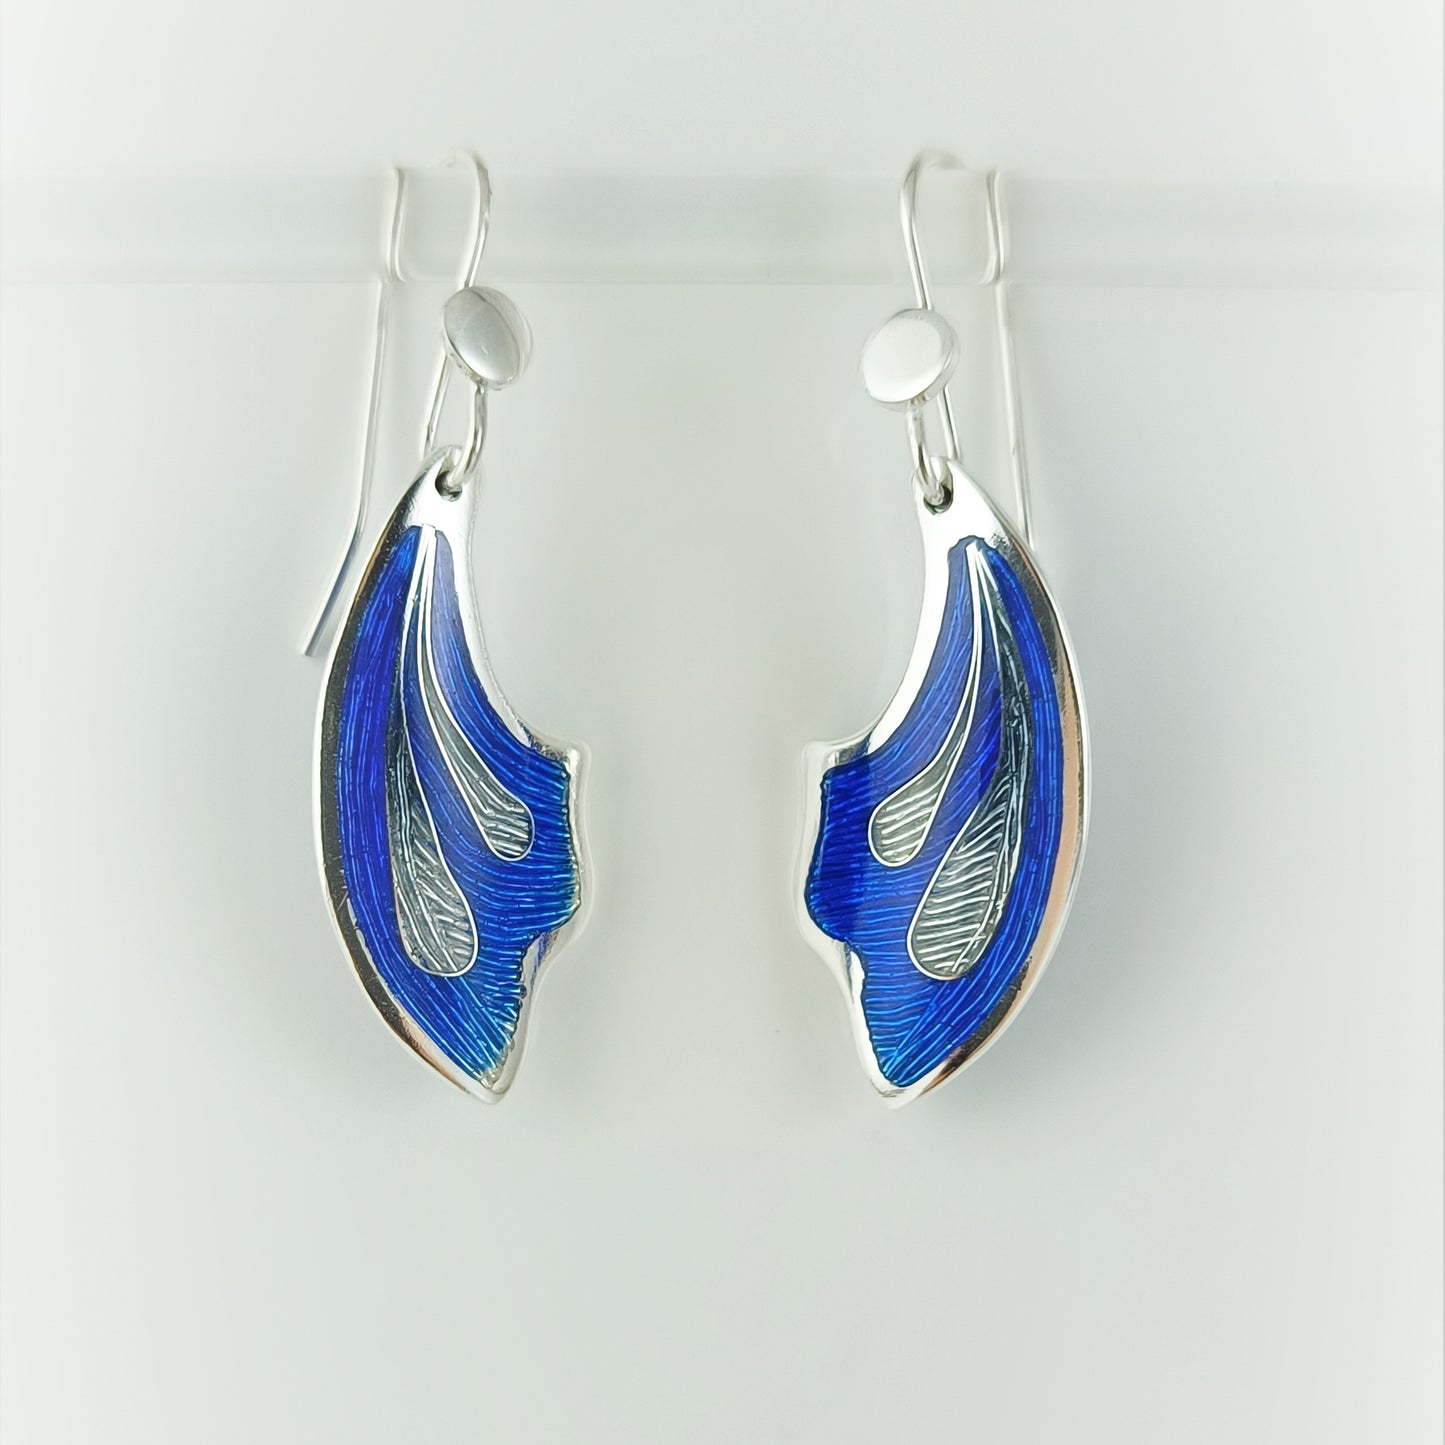 Blue Iris Champleve and Cloisonne Silver Earrings